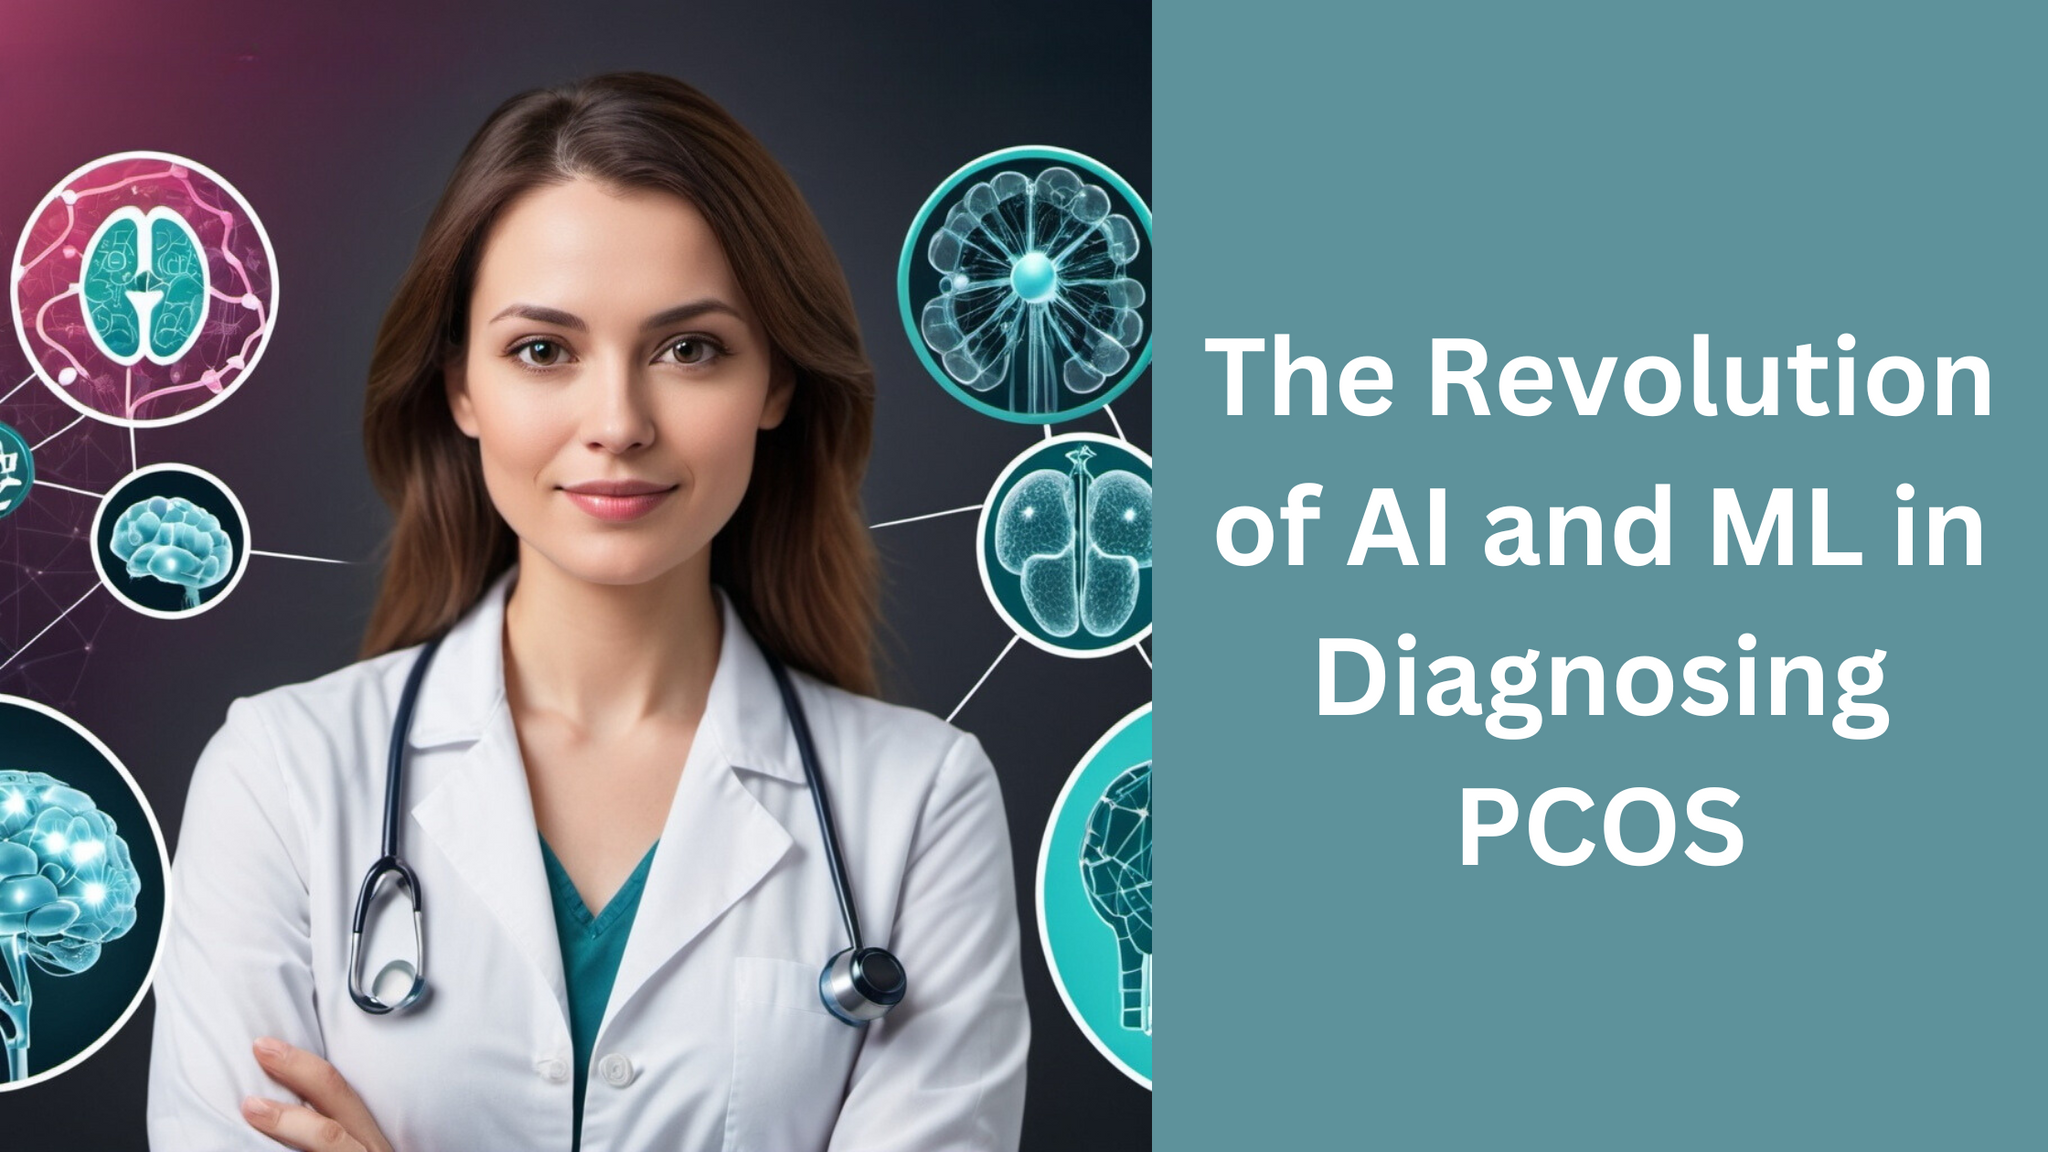 The Revolution of AI and ML in Diagnosing PCOS